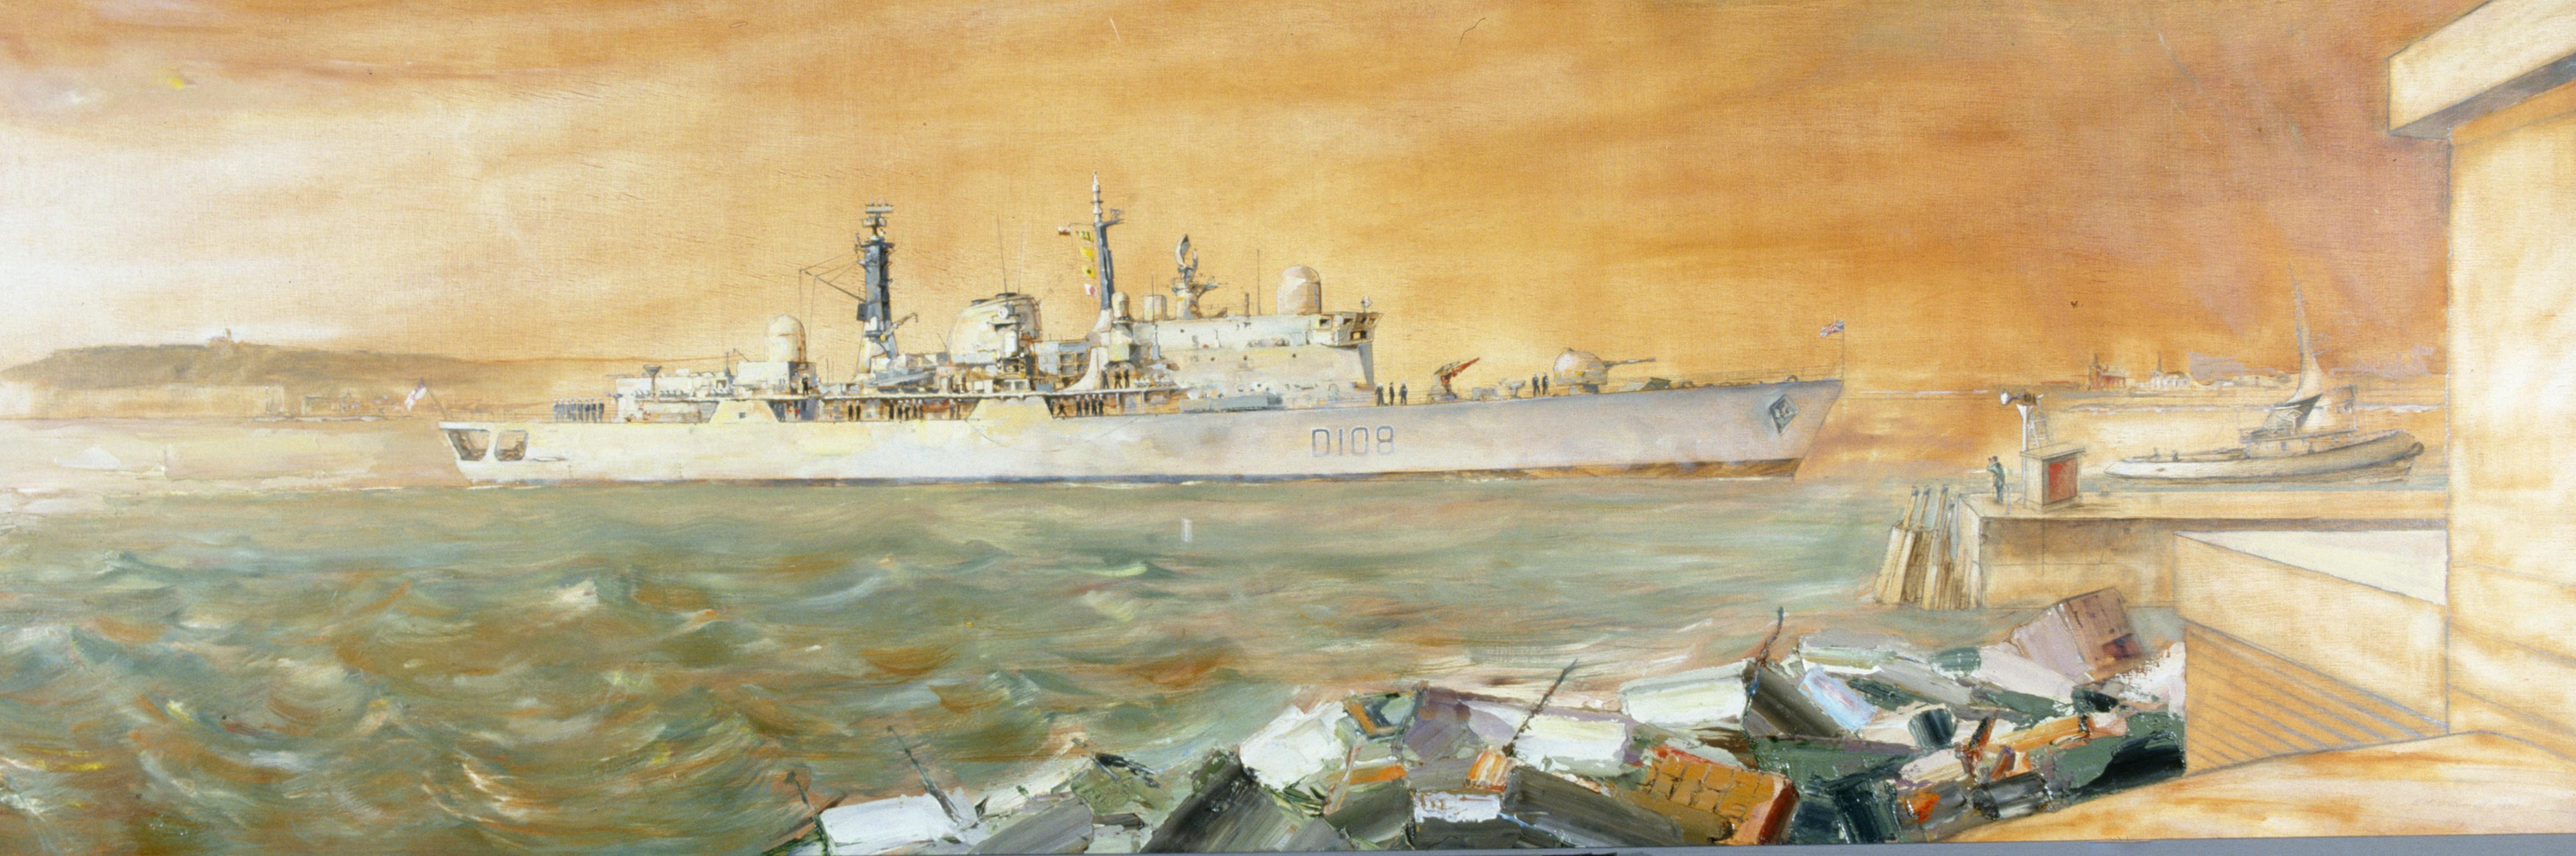 H.M.S. CARDIFF, painting